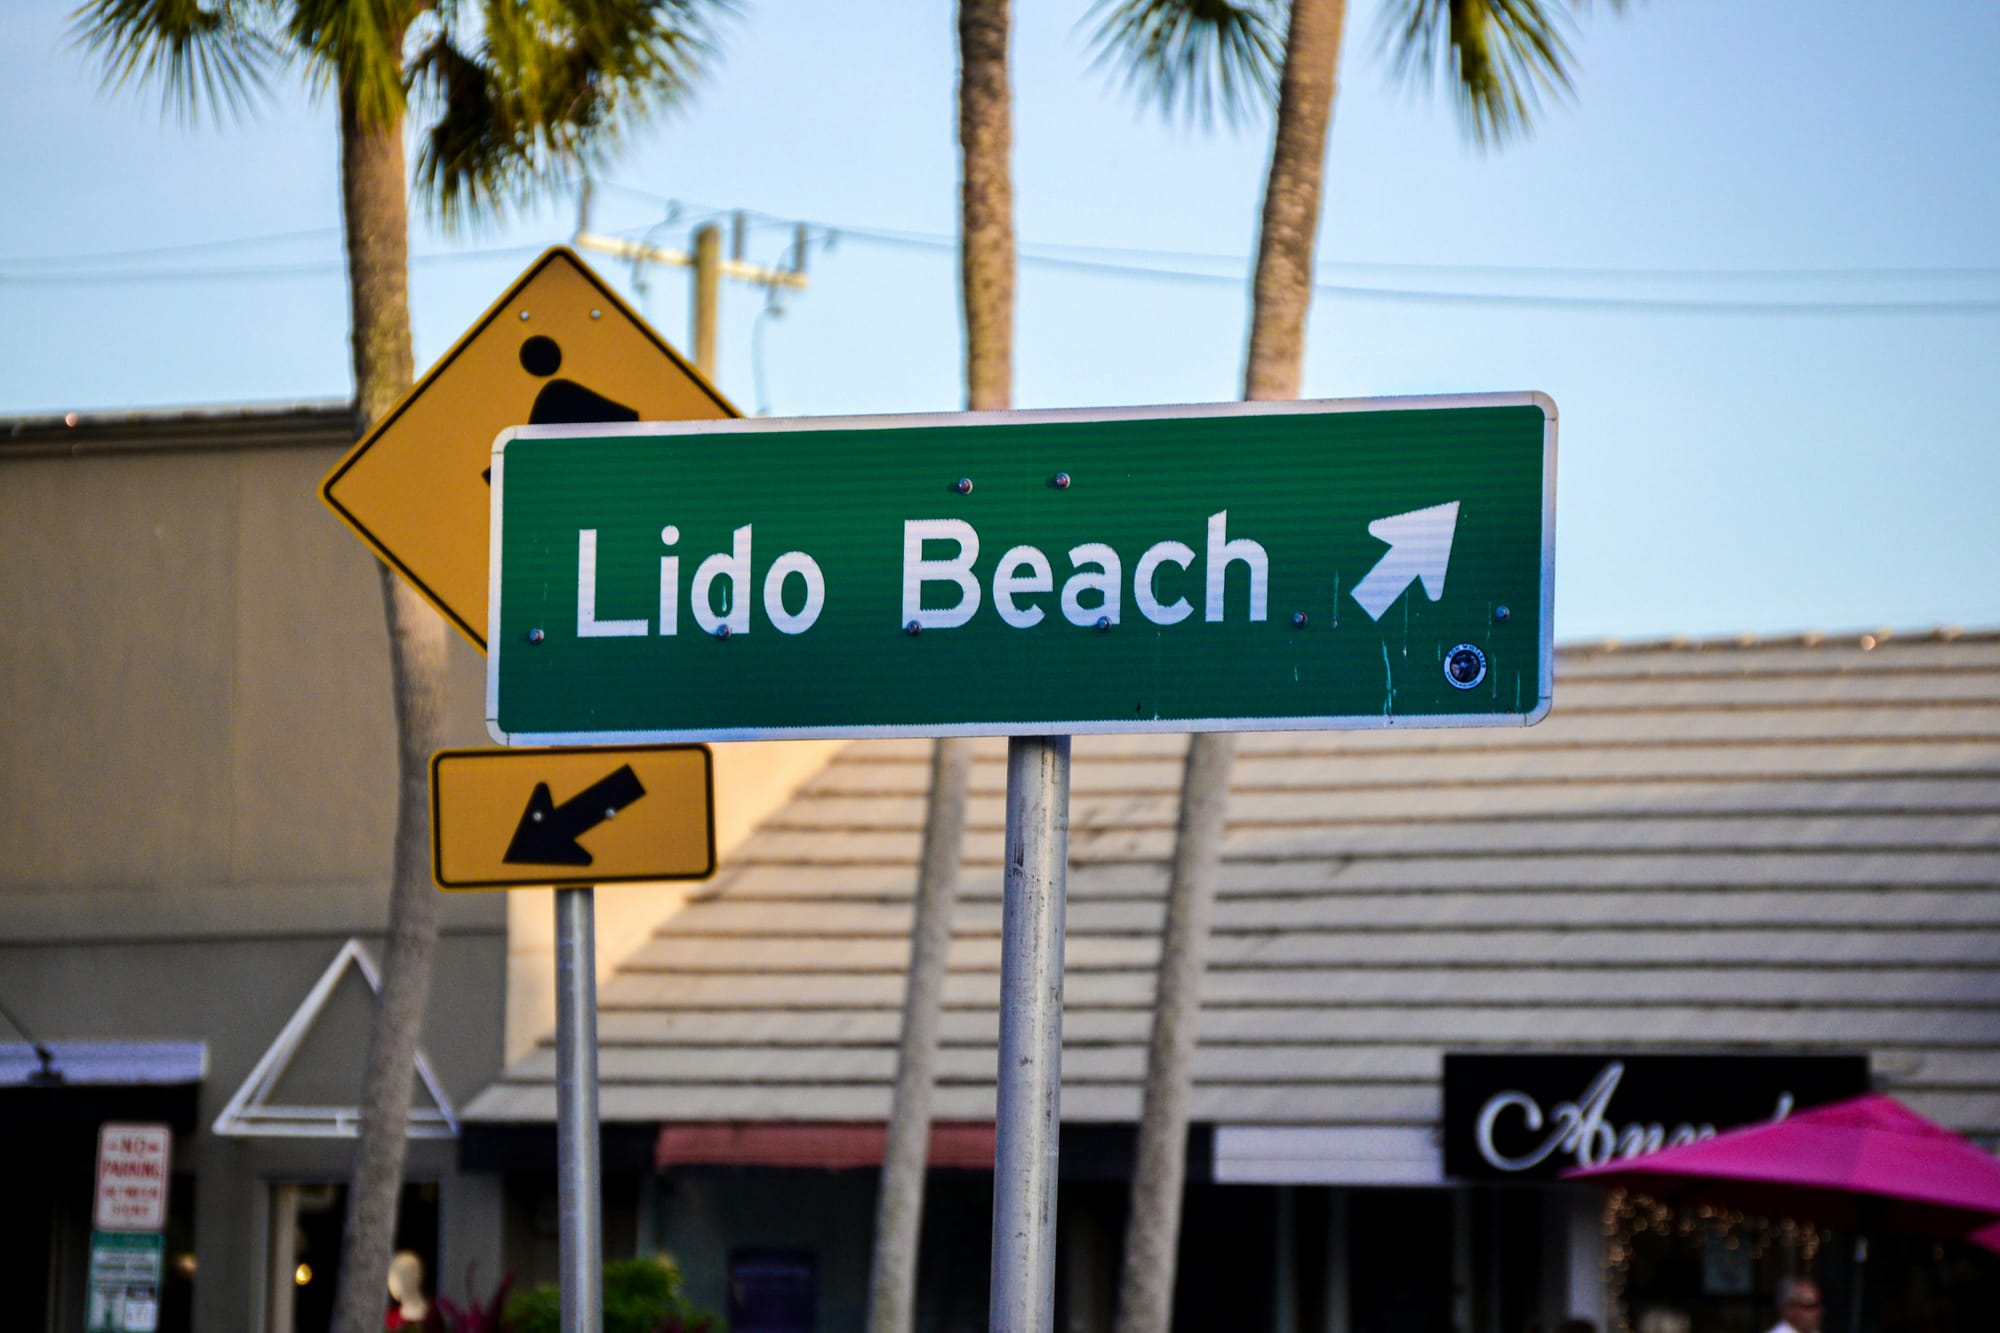 Lido Beach sign in St. Armands Circle